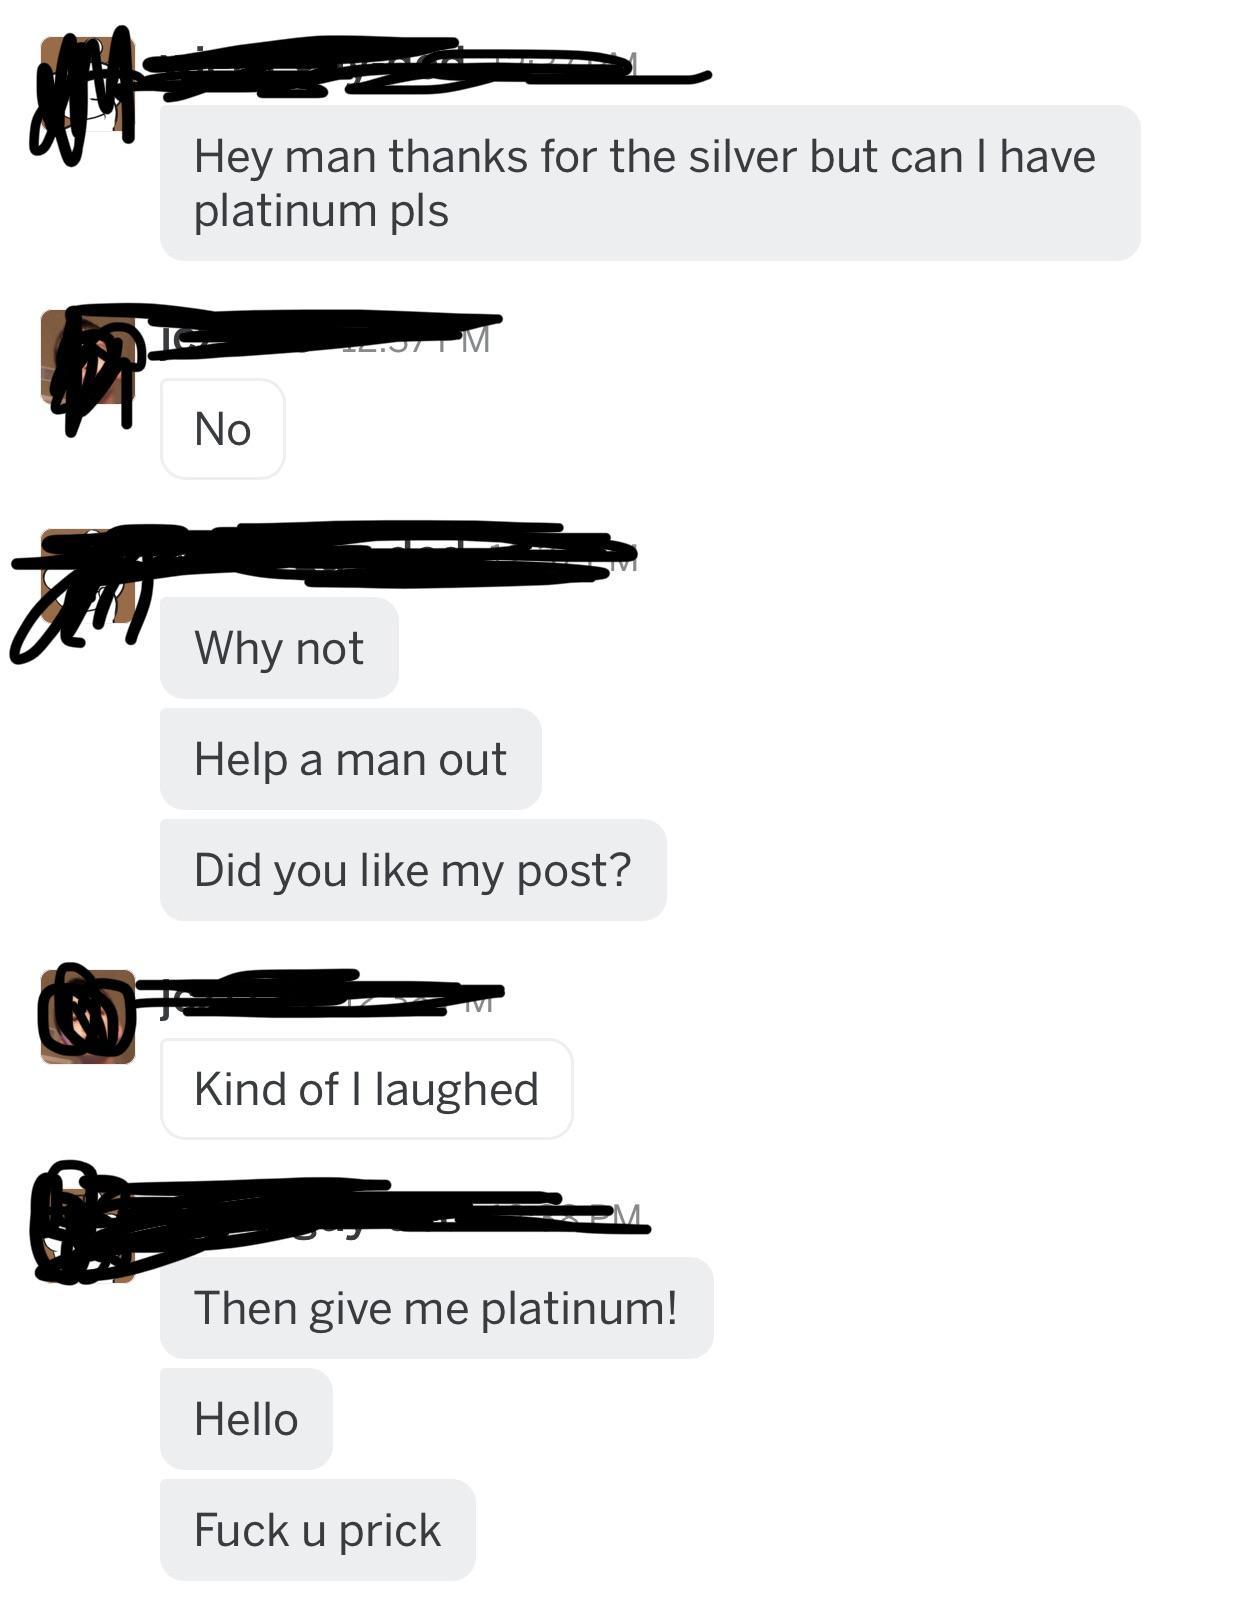 angle - Hey man thanks for the silver but can I have platinum pls No Wir why not Why not Help a man out Did you my post? Kind of I laughed Then give me platinum! Hello Fuck u prick